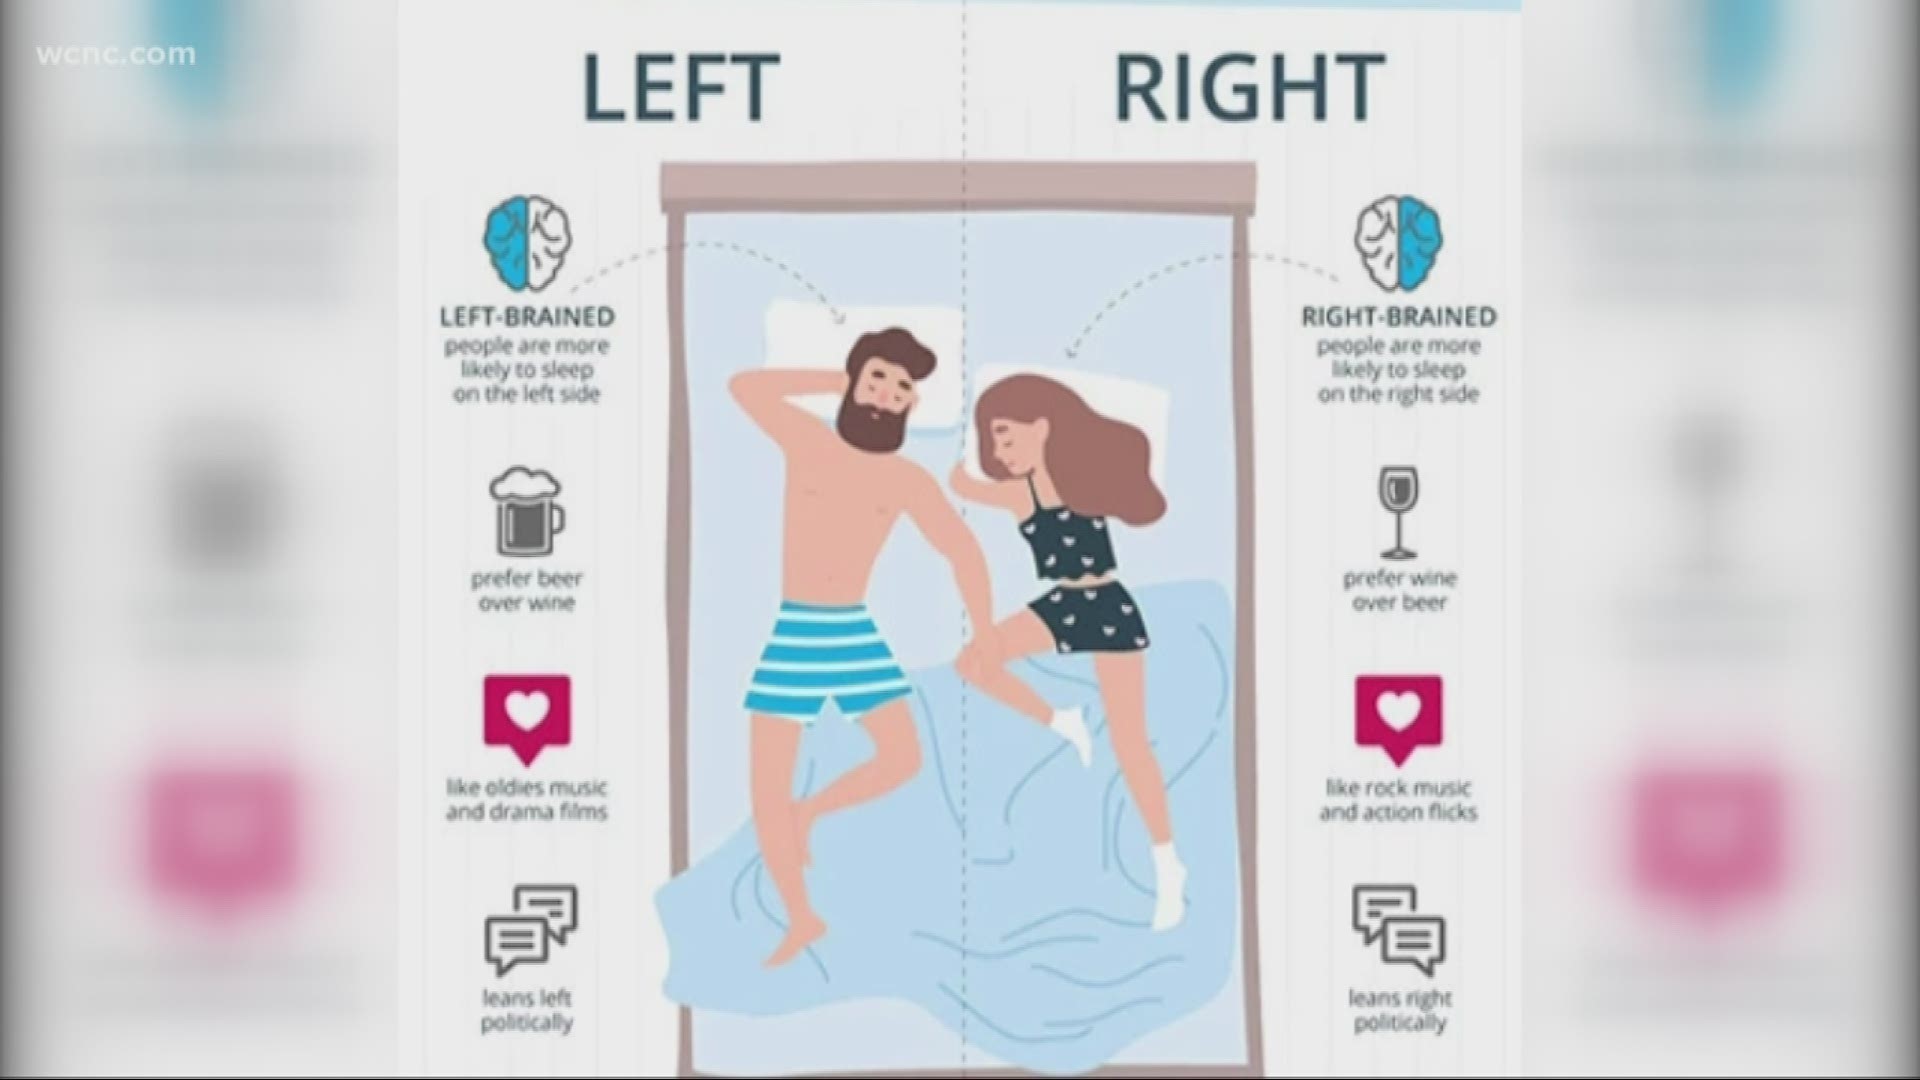 Did you know the side of the bed you sleep on reveals a lot about your personality?